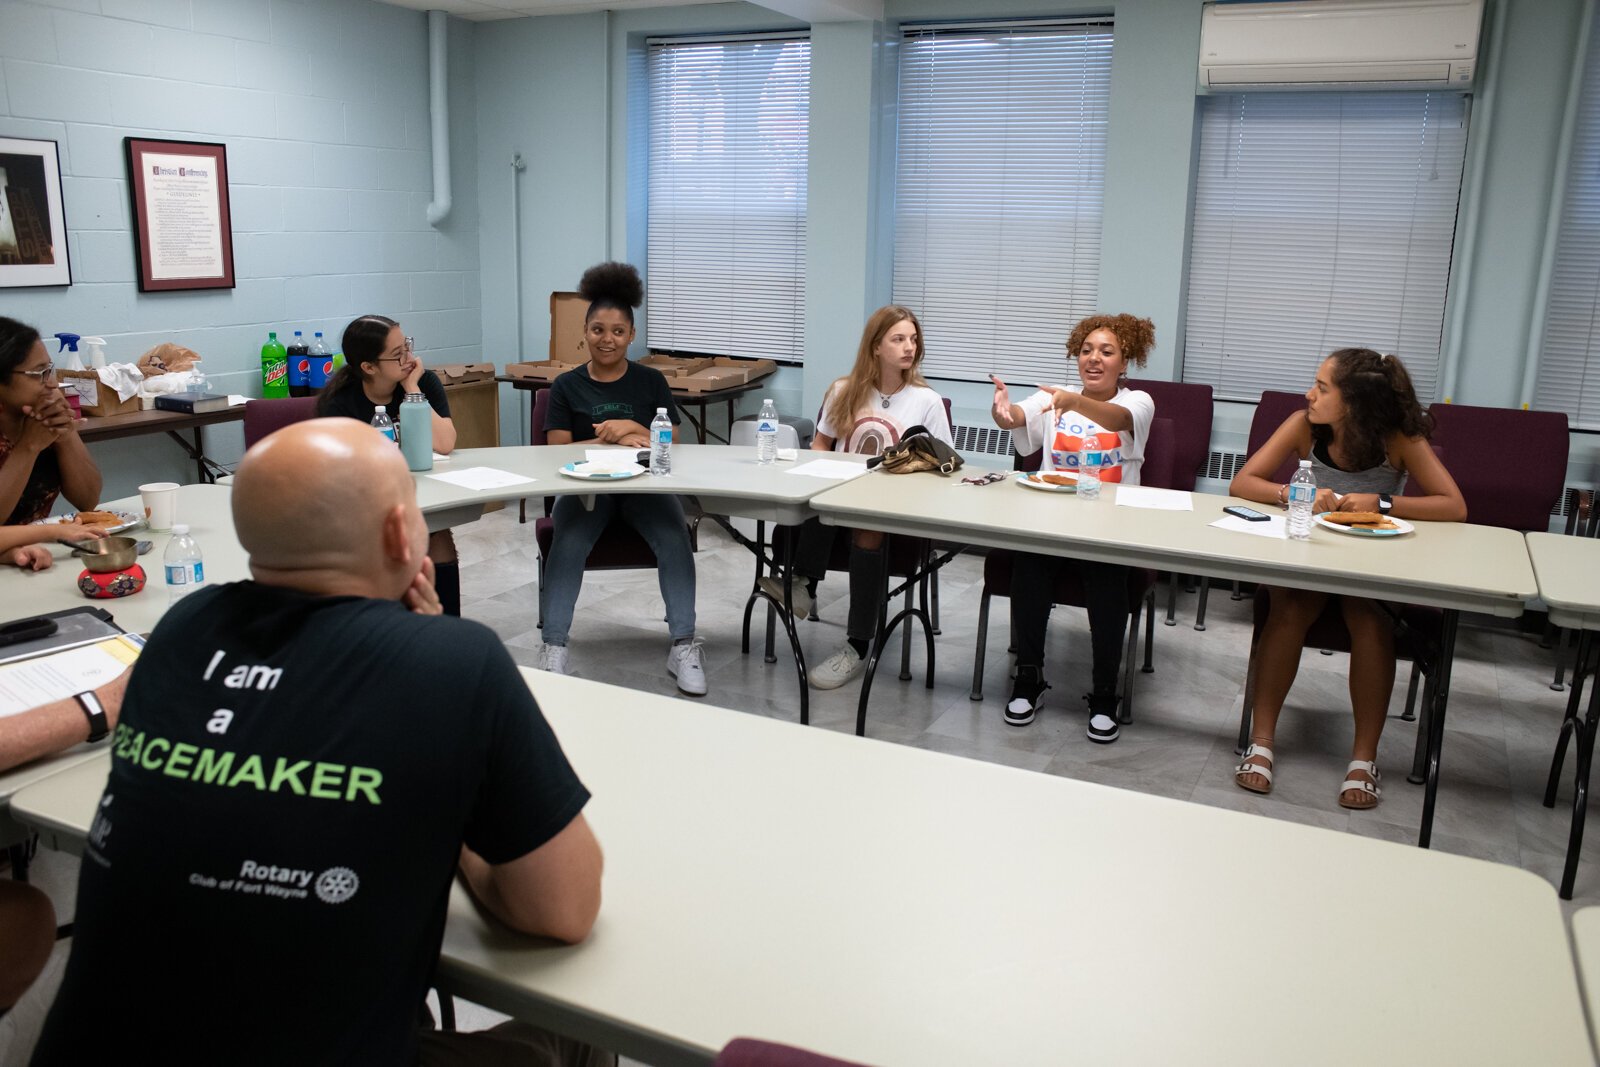 The Peacemaker Academy meeting at First Wayne St. United Methodist Church on August 22, 2021.